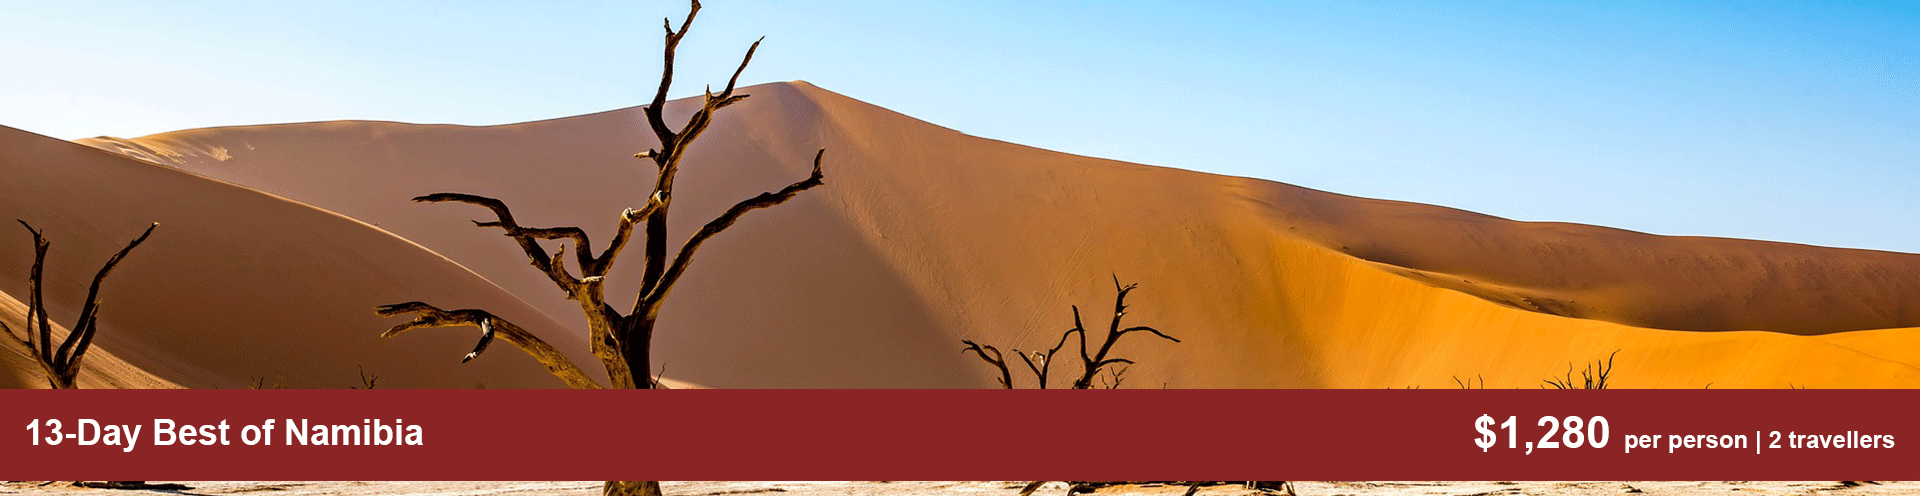 13-Day-Best-of-Namibia